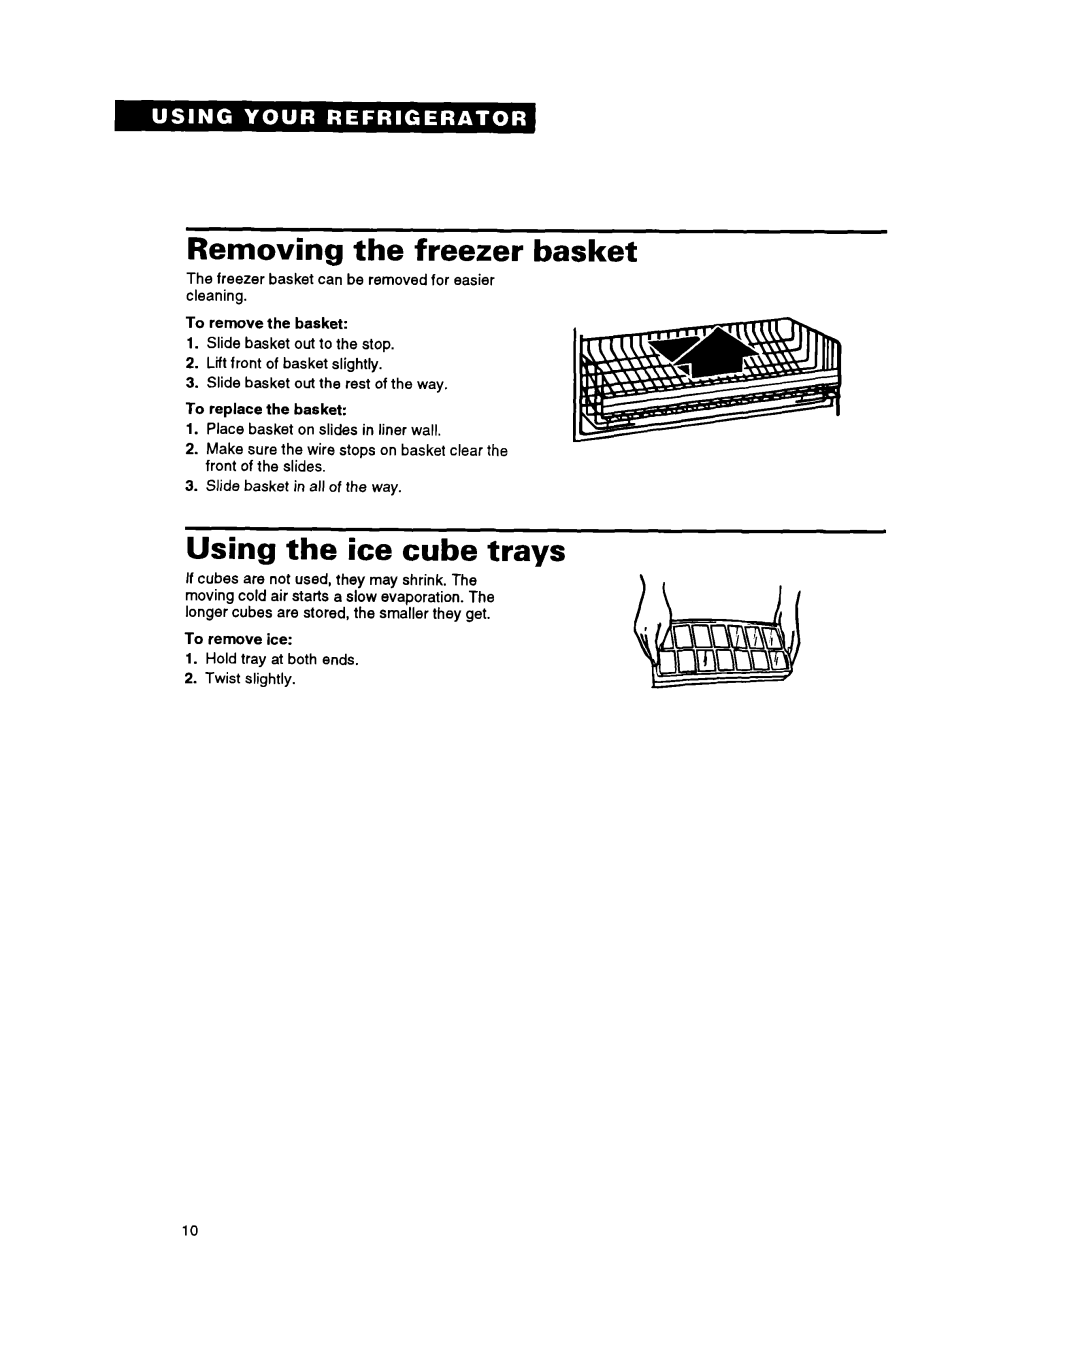 Whirlpool RBZICK important safety instructions Removing the freezer basket, Using the ice cube trays 